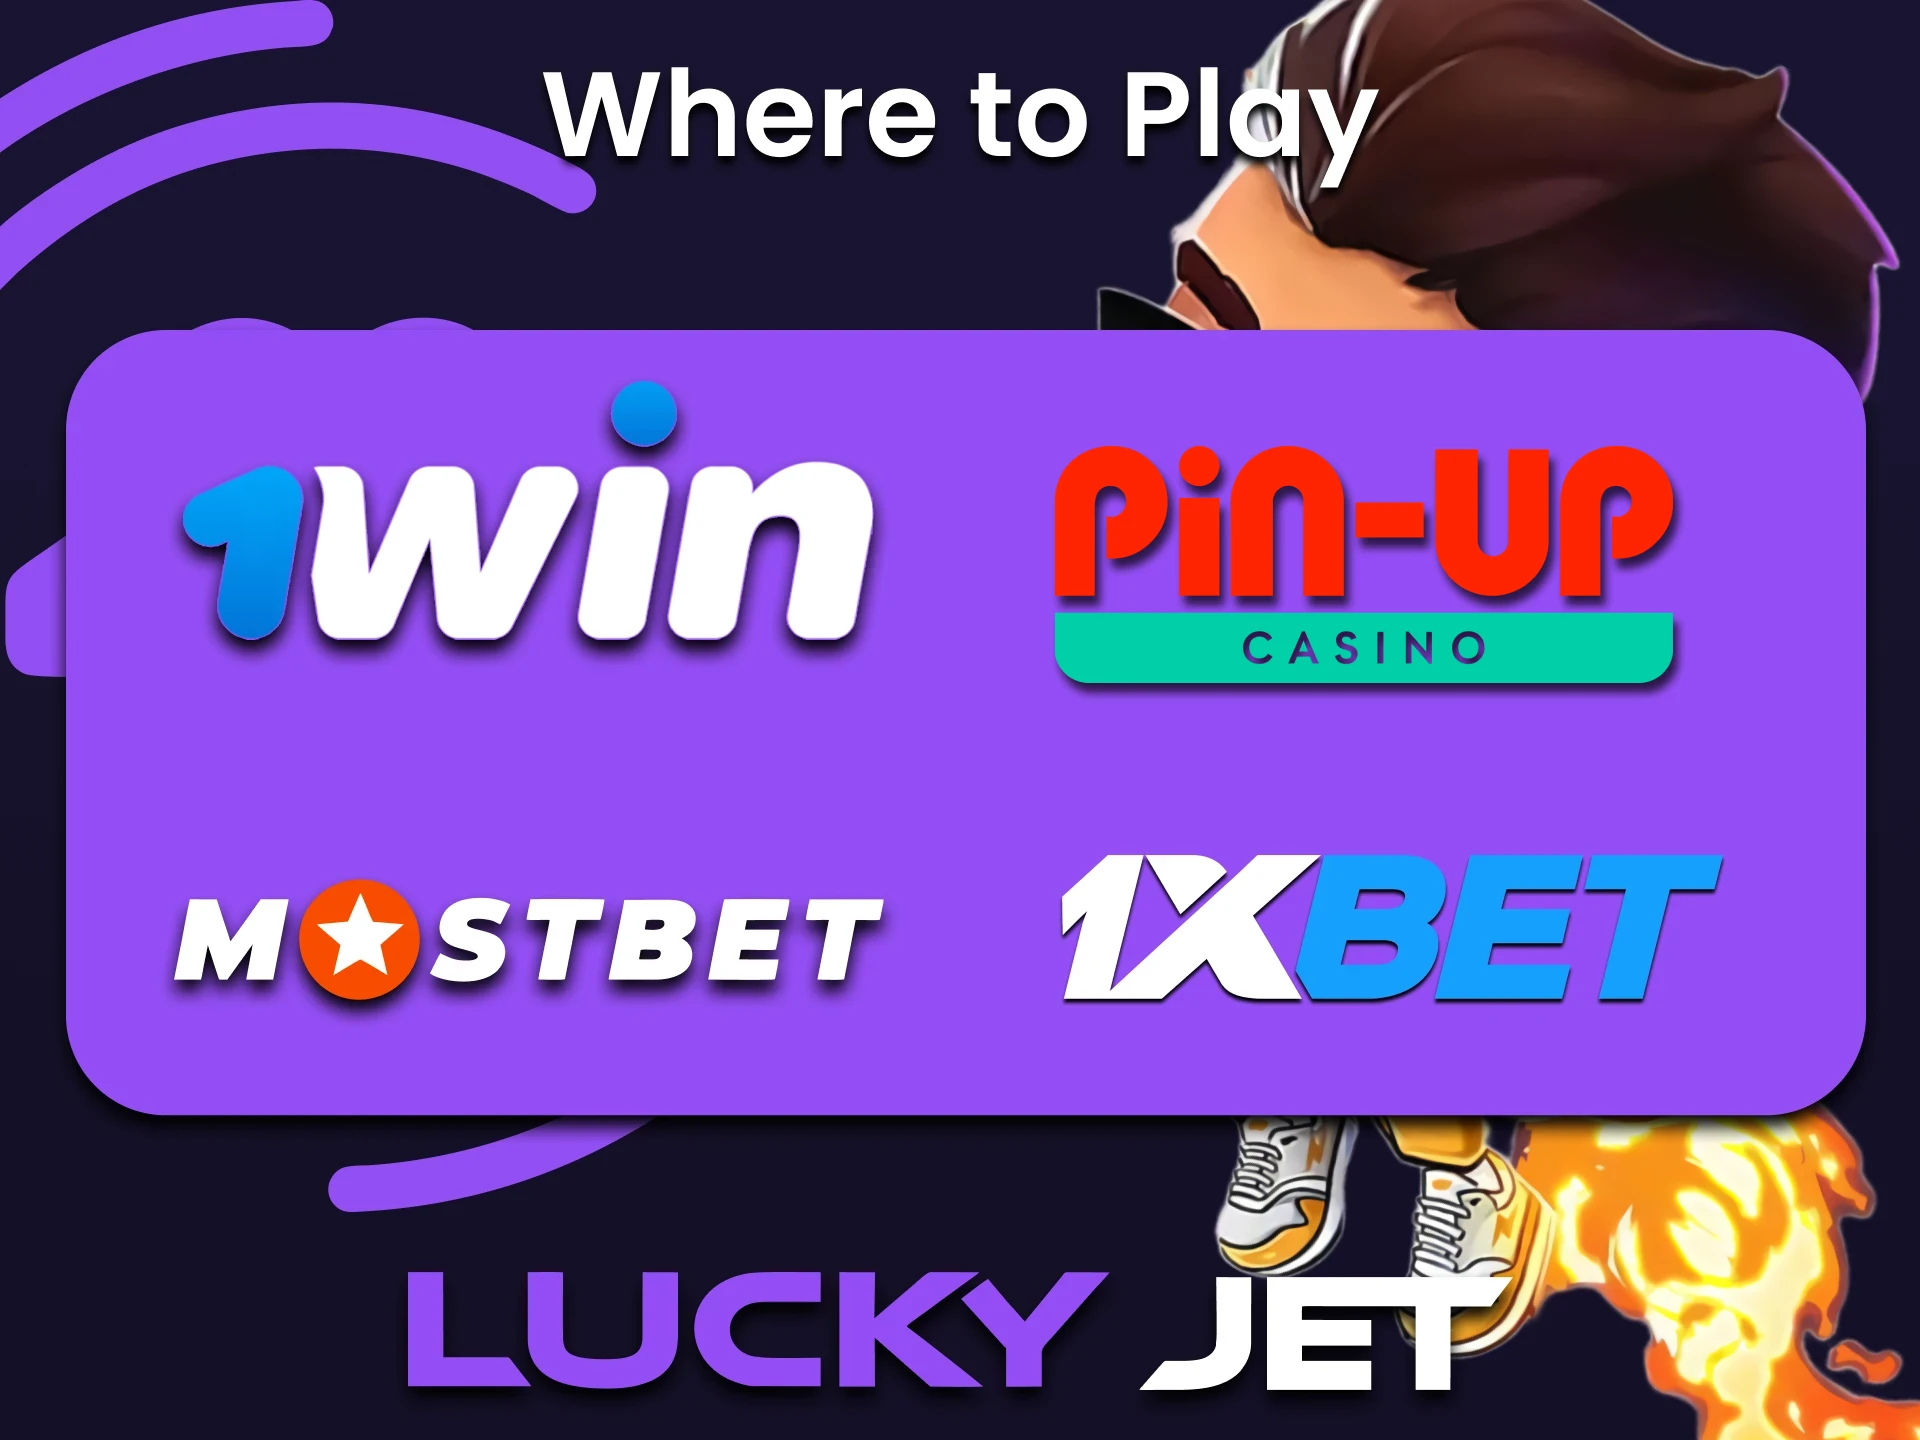 Check out the list of services for playing lucky Jet.